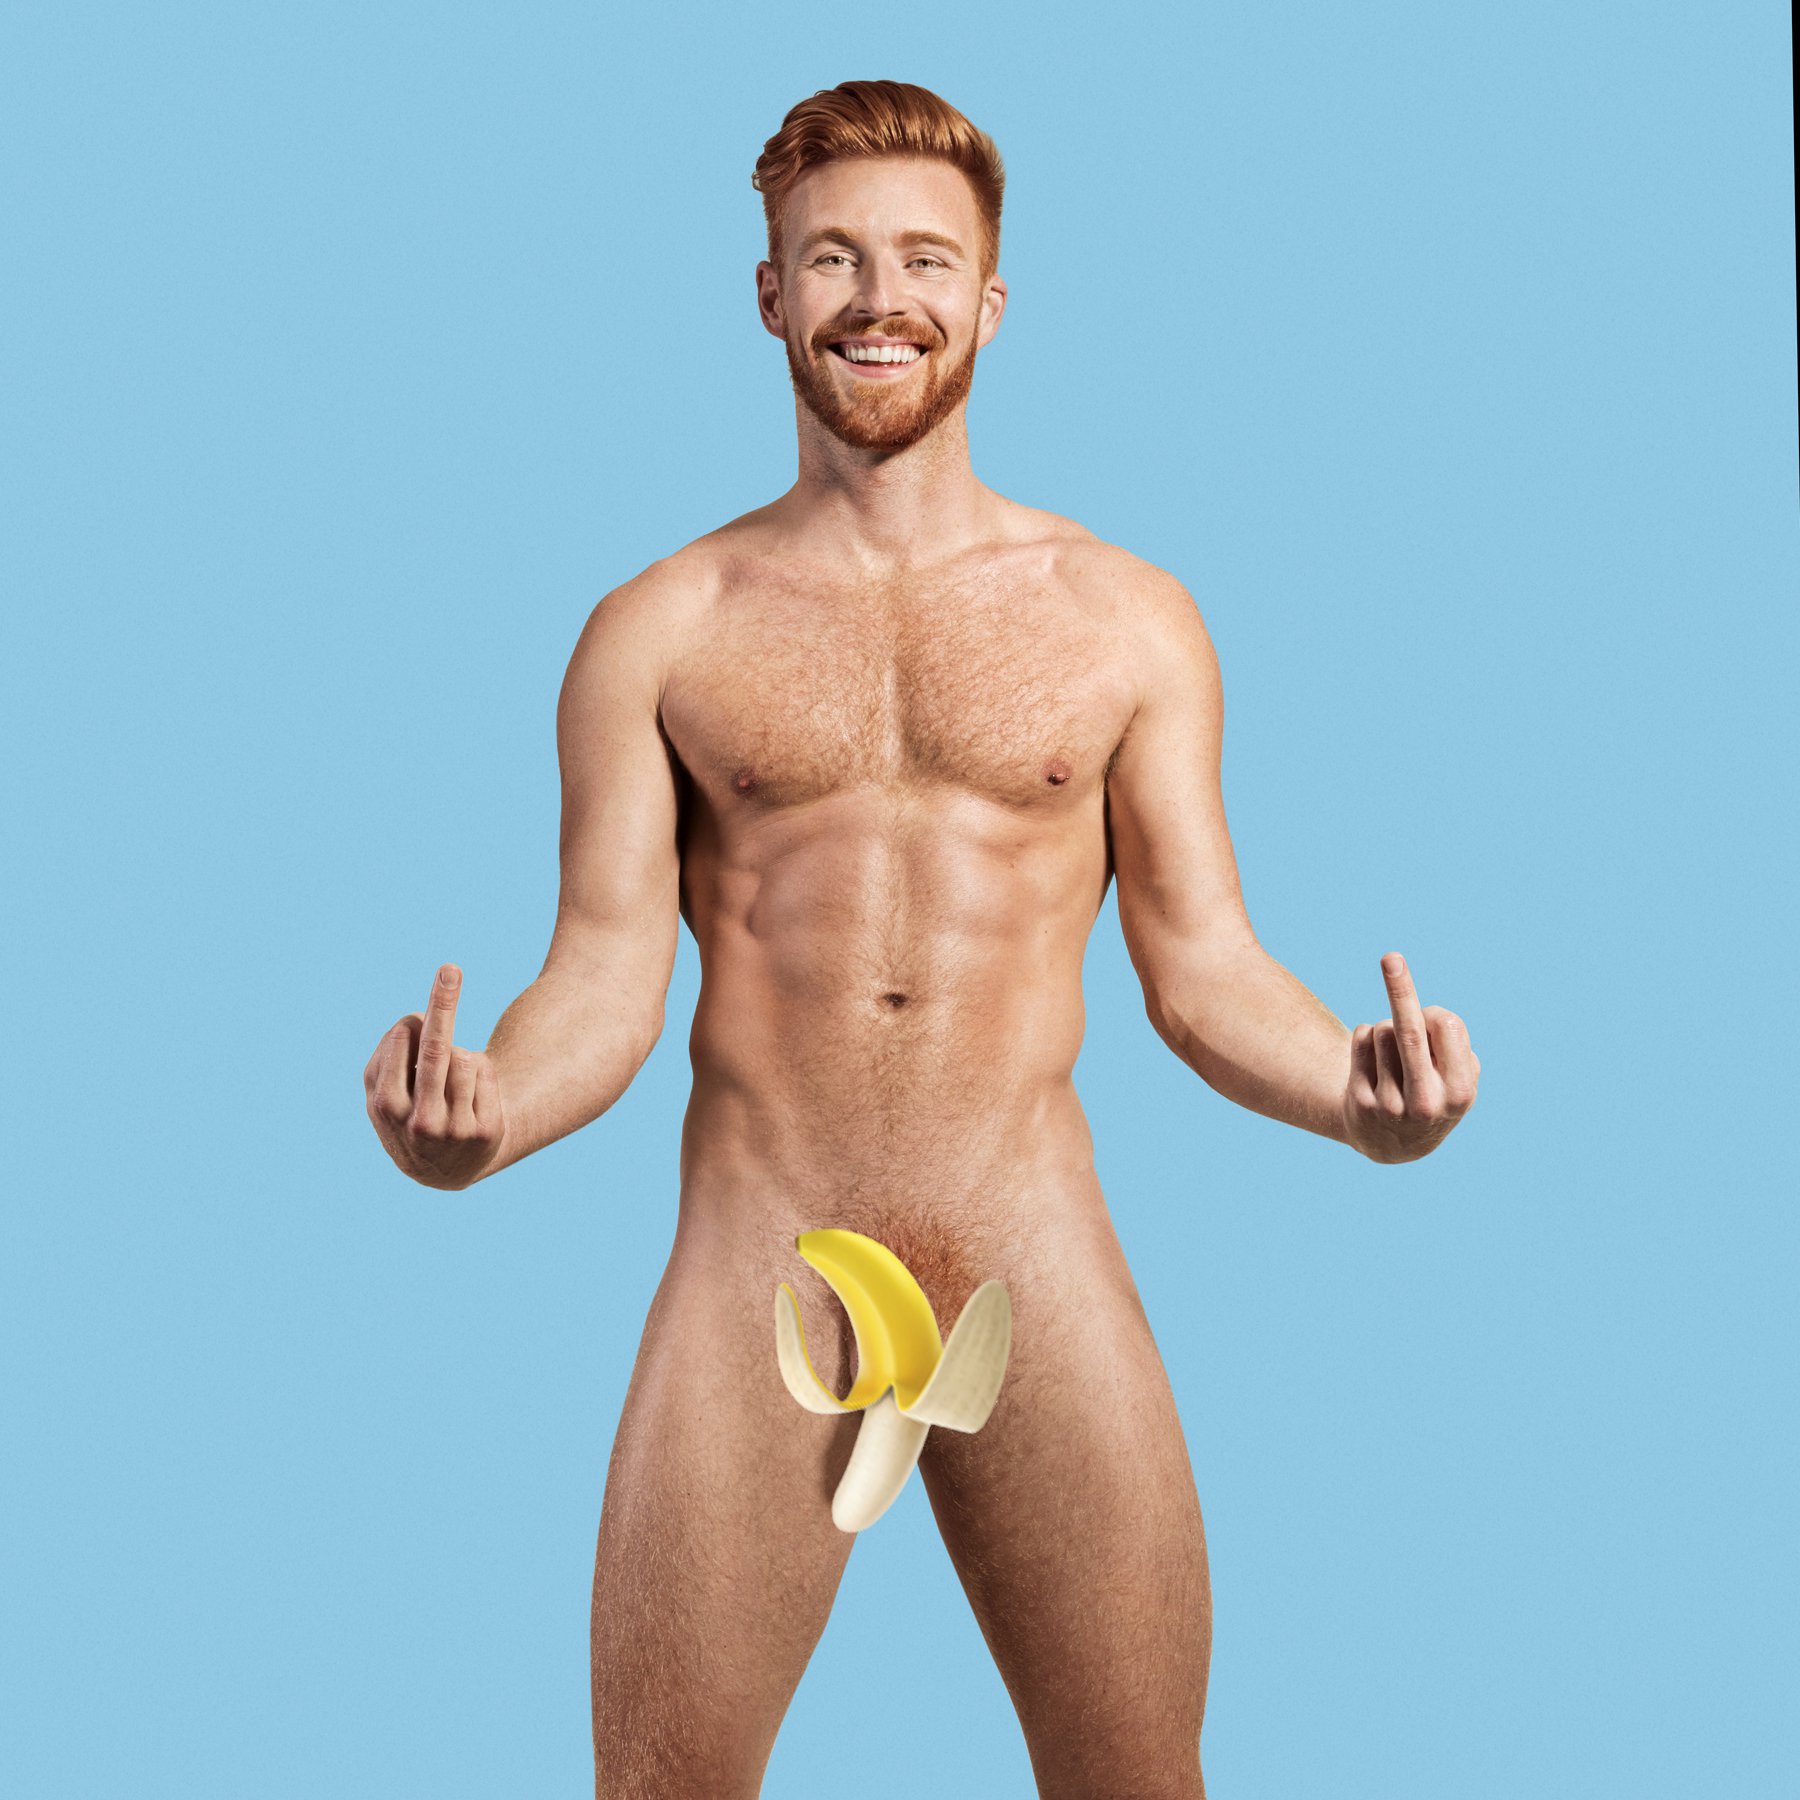 Alex features on the back cover of the 'Red Hot Cocks' charity calendar